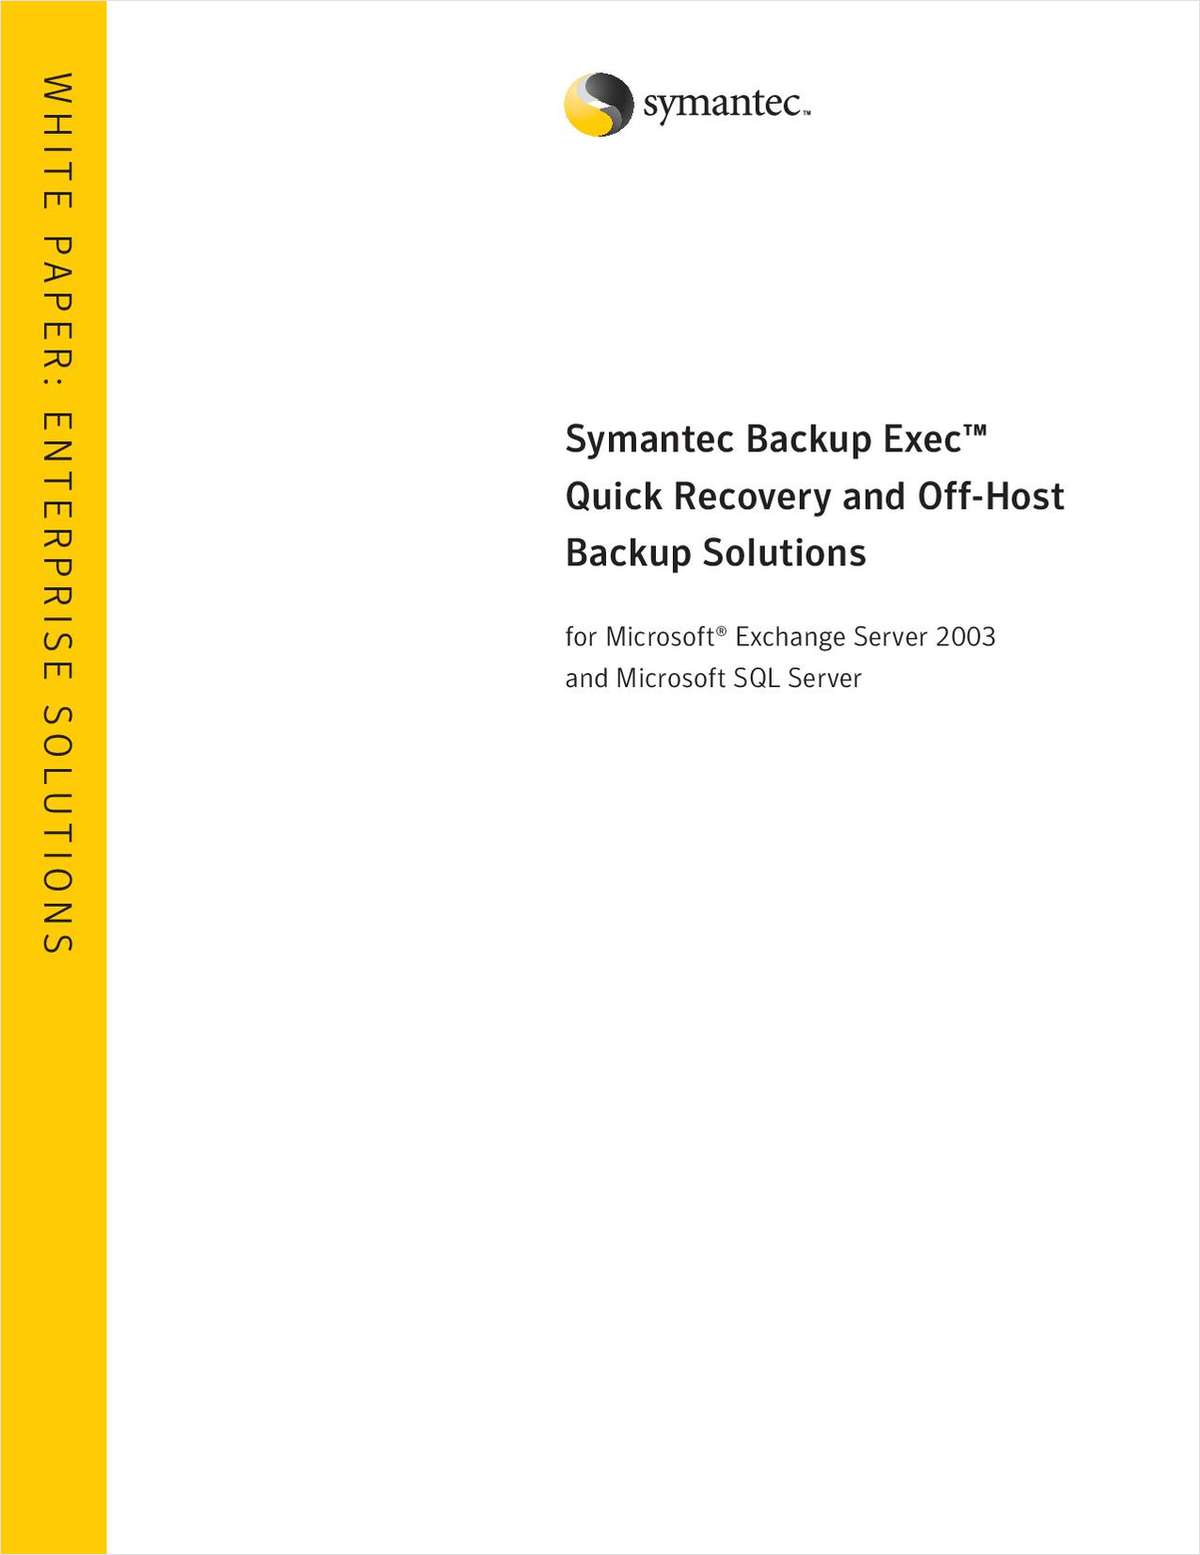 Symantec Backup Exec™ Quick Recovery and Off-Host Backup Solutions for Microsoft® Exchange Server 2003 and Microsoft SQL Server